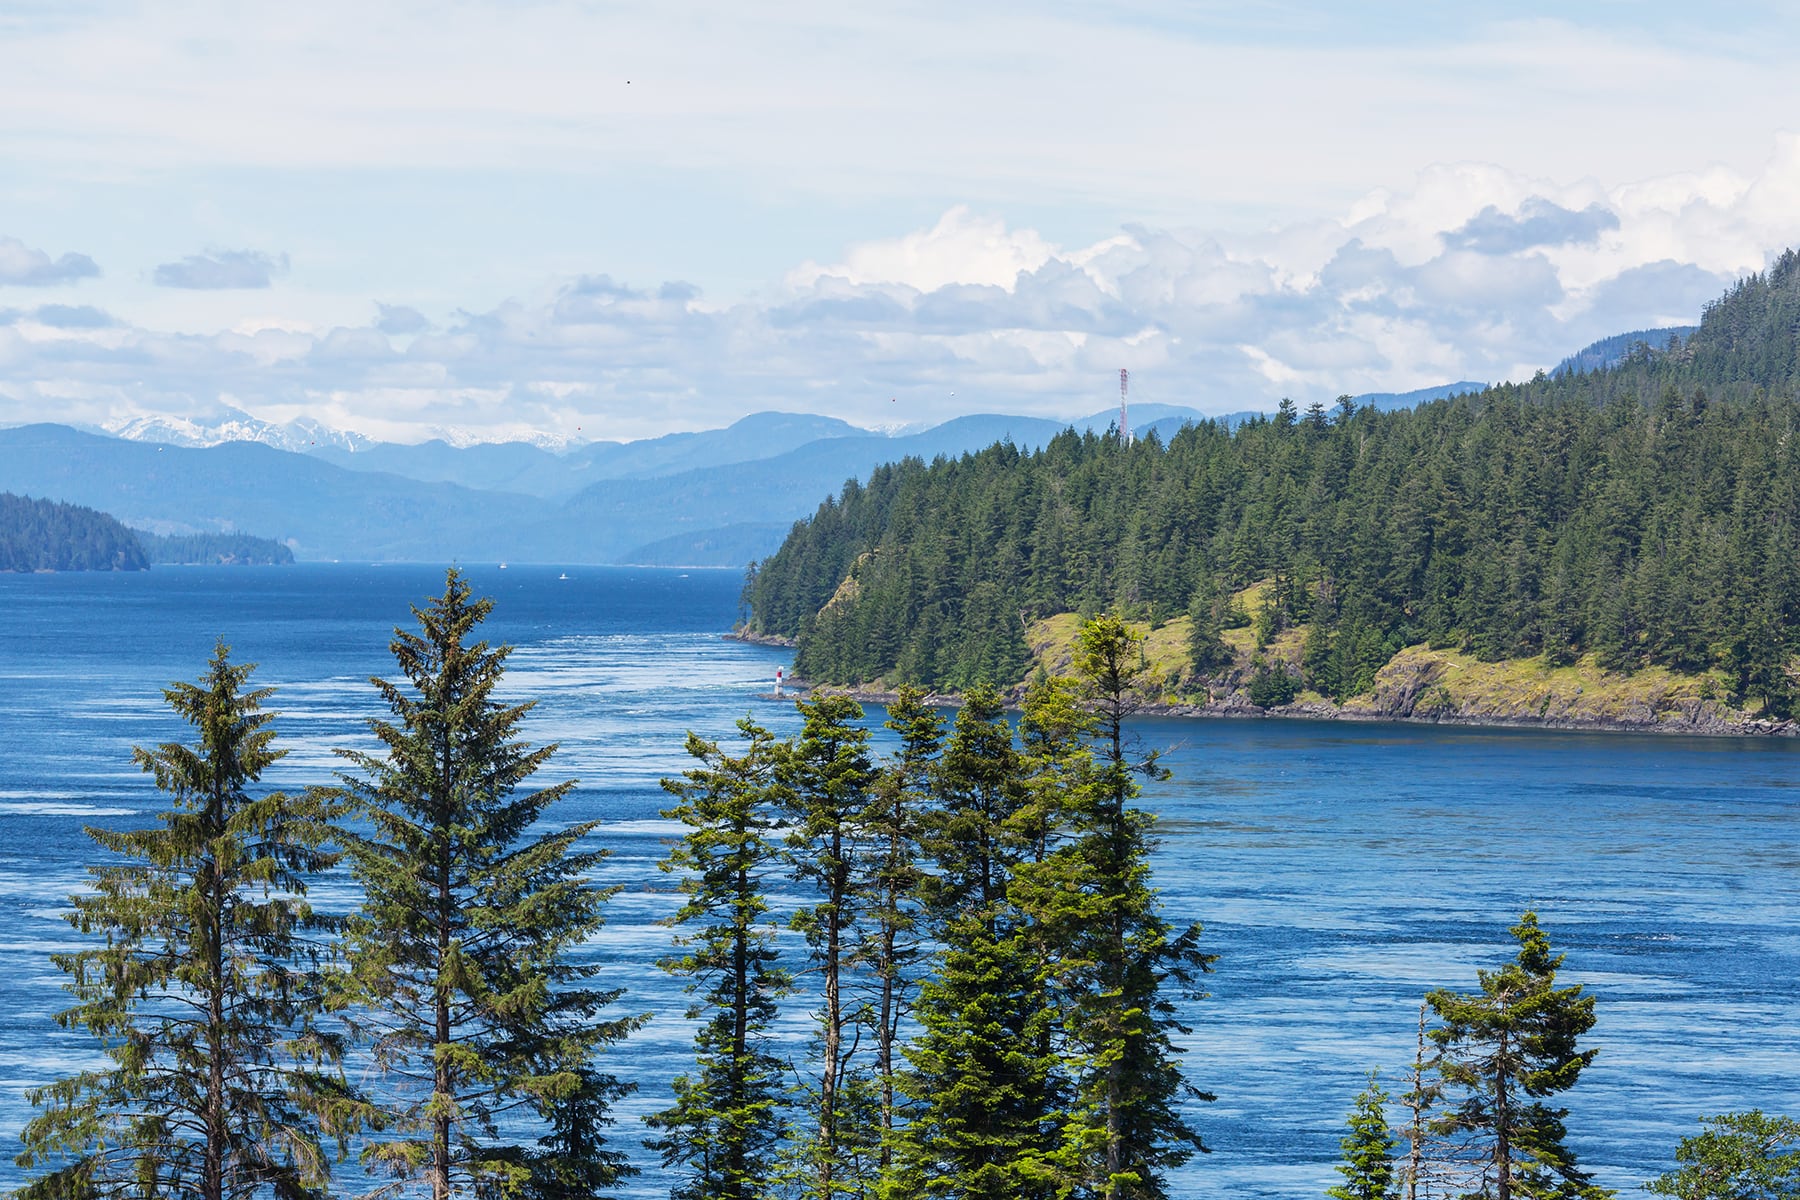 View of the ocean off the coast of Vancouver Island, Canada